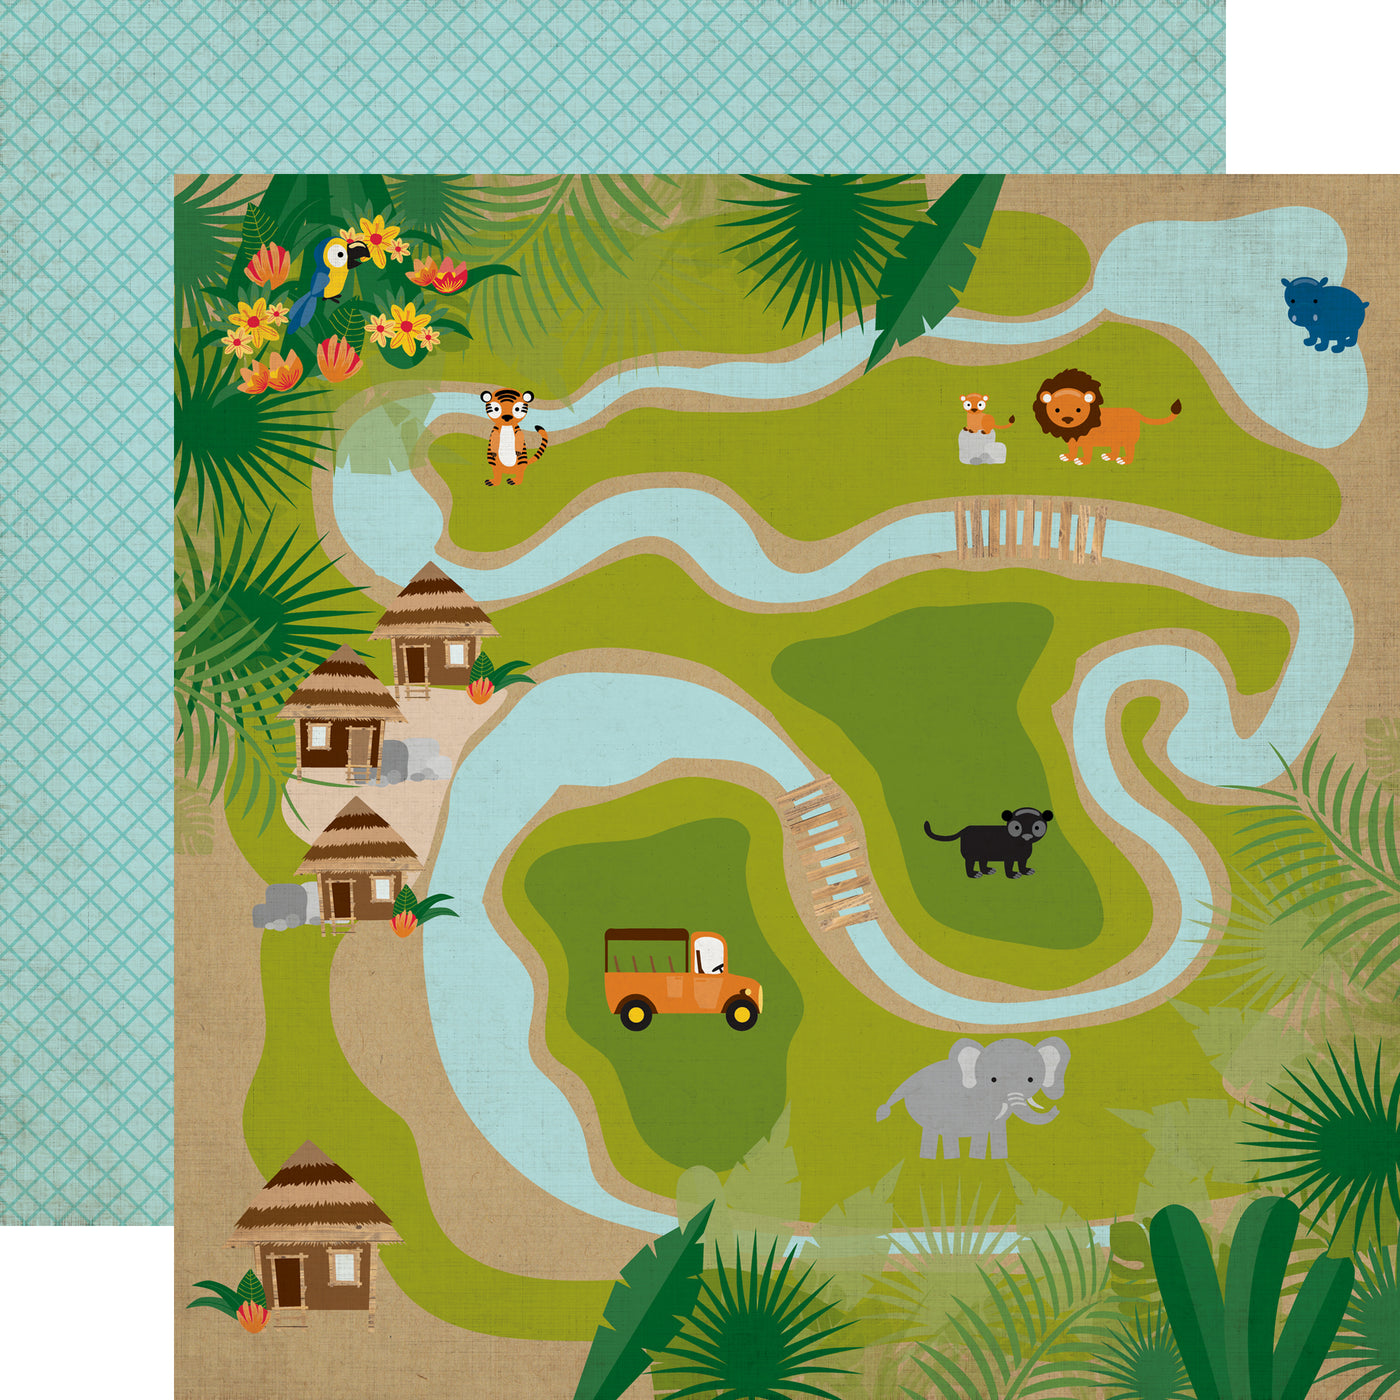 Jungle Map patterned cardstock (a map of the jungle covering the whole sheet with a thin blue lattice design on teal blue background reverse)